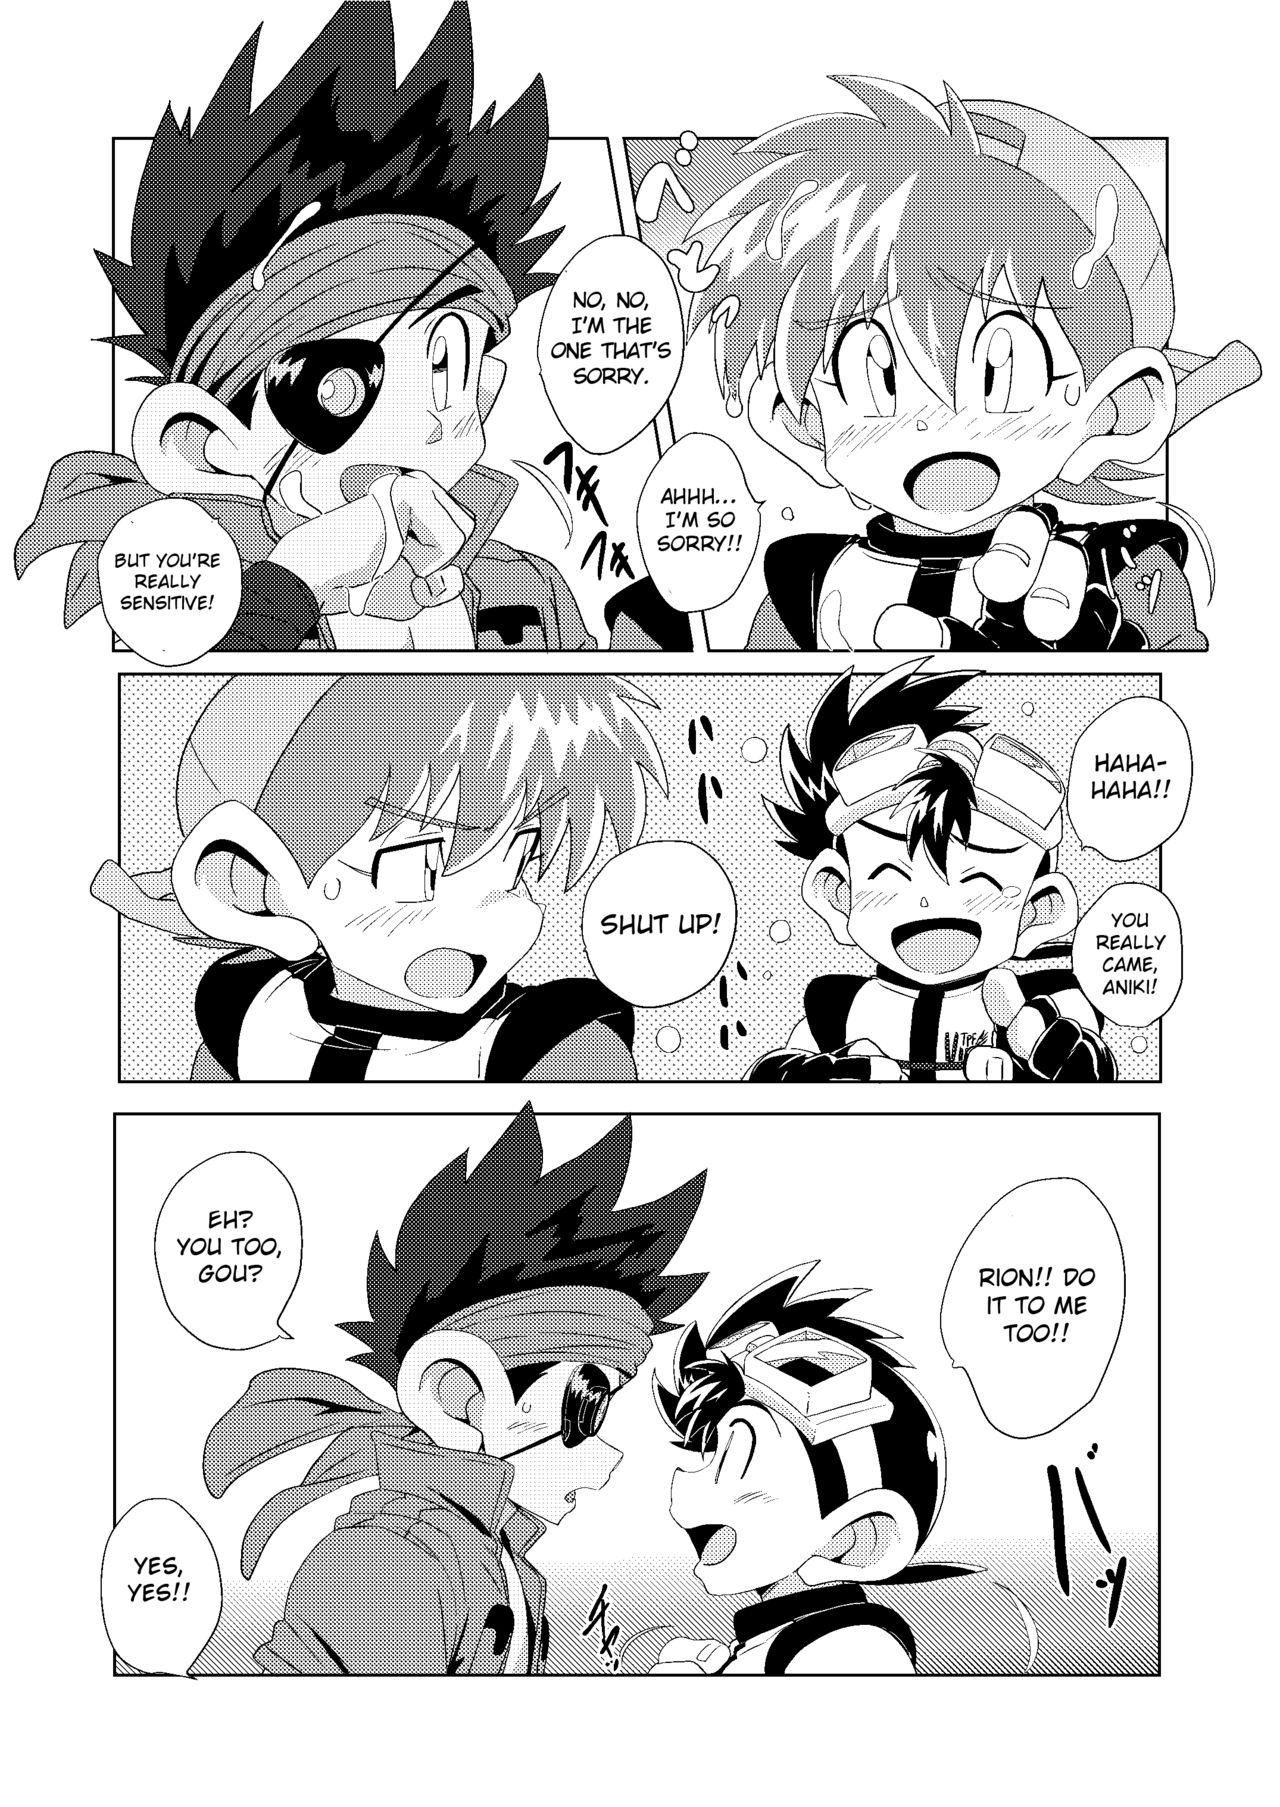 Argentino Chase the Wind - Bakusou kyoudai lets and go Bedroom - Page 6